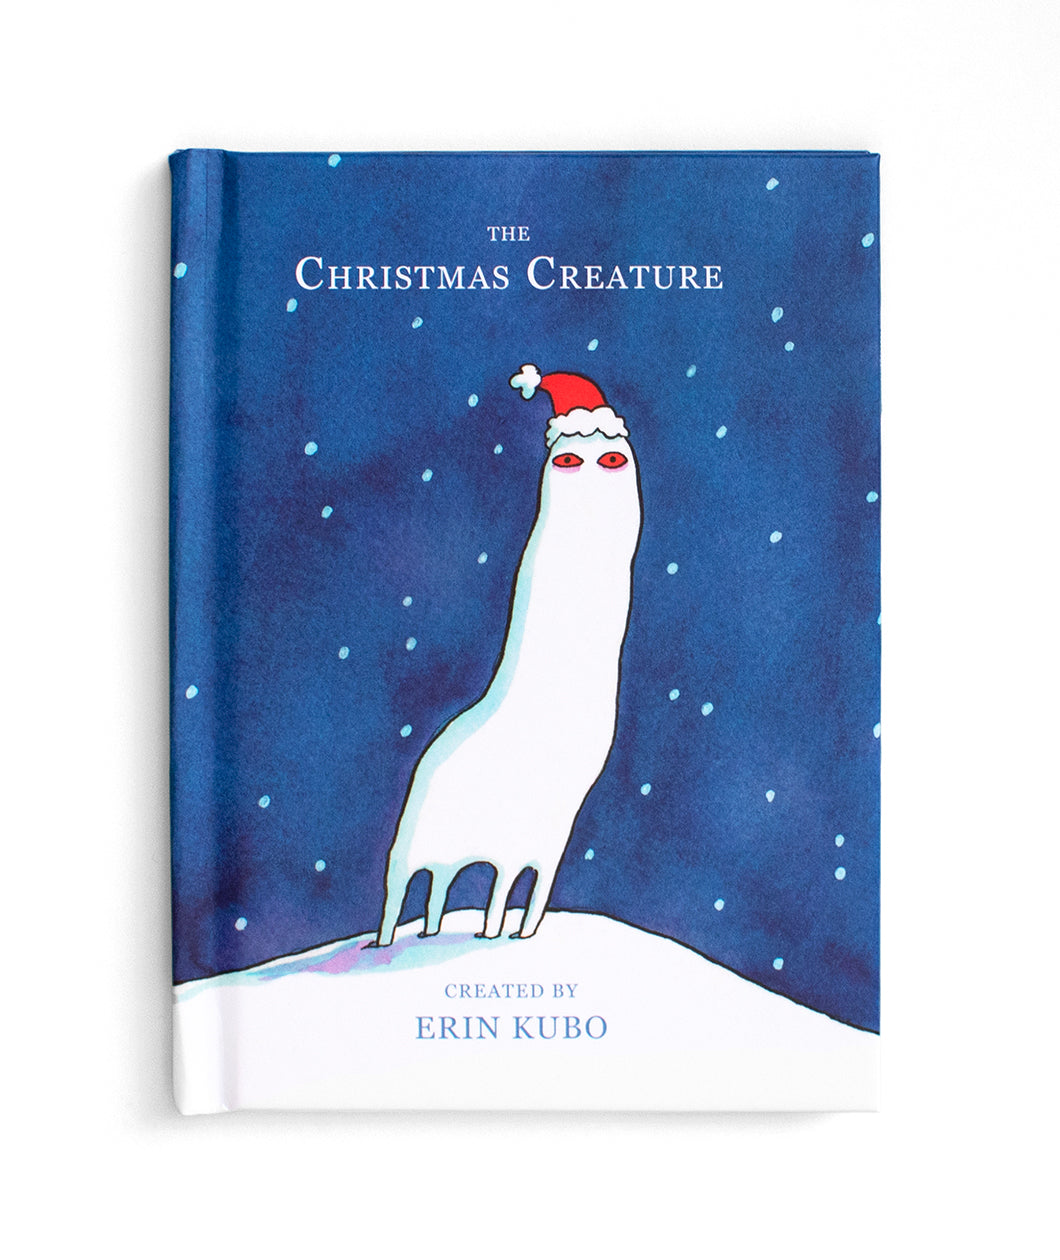 A book with a four legged white creature with a tall neck and red eyes with a Santa hat on standing in the snow against a blue background and snow falling behind. “The Christmas Creature” is at the top in white serif font - from Erin Kubo